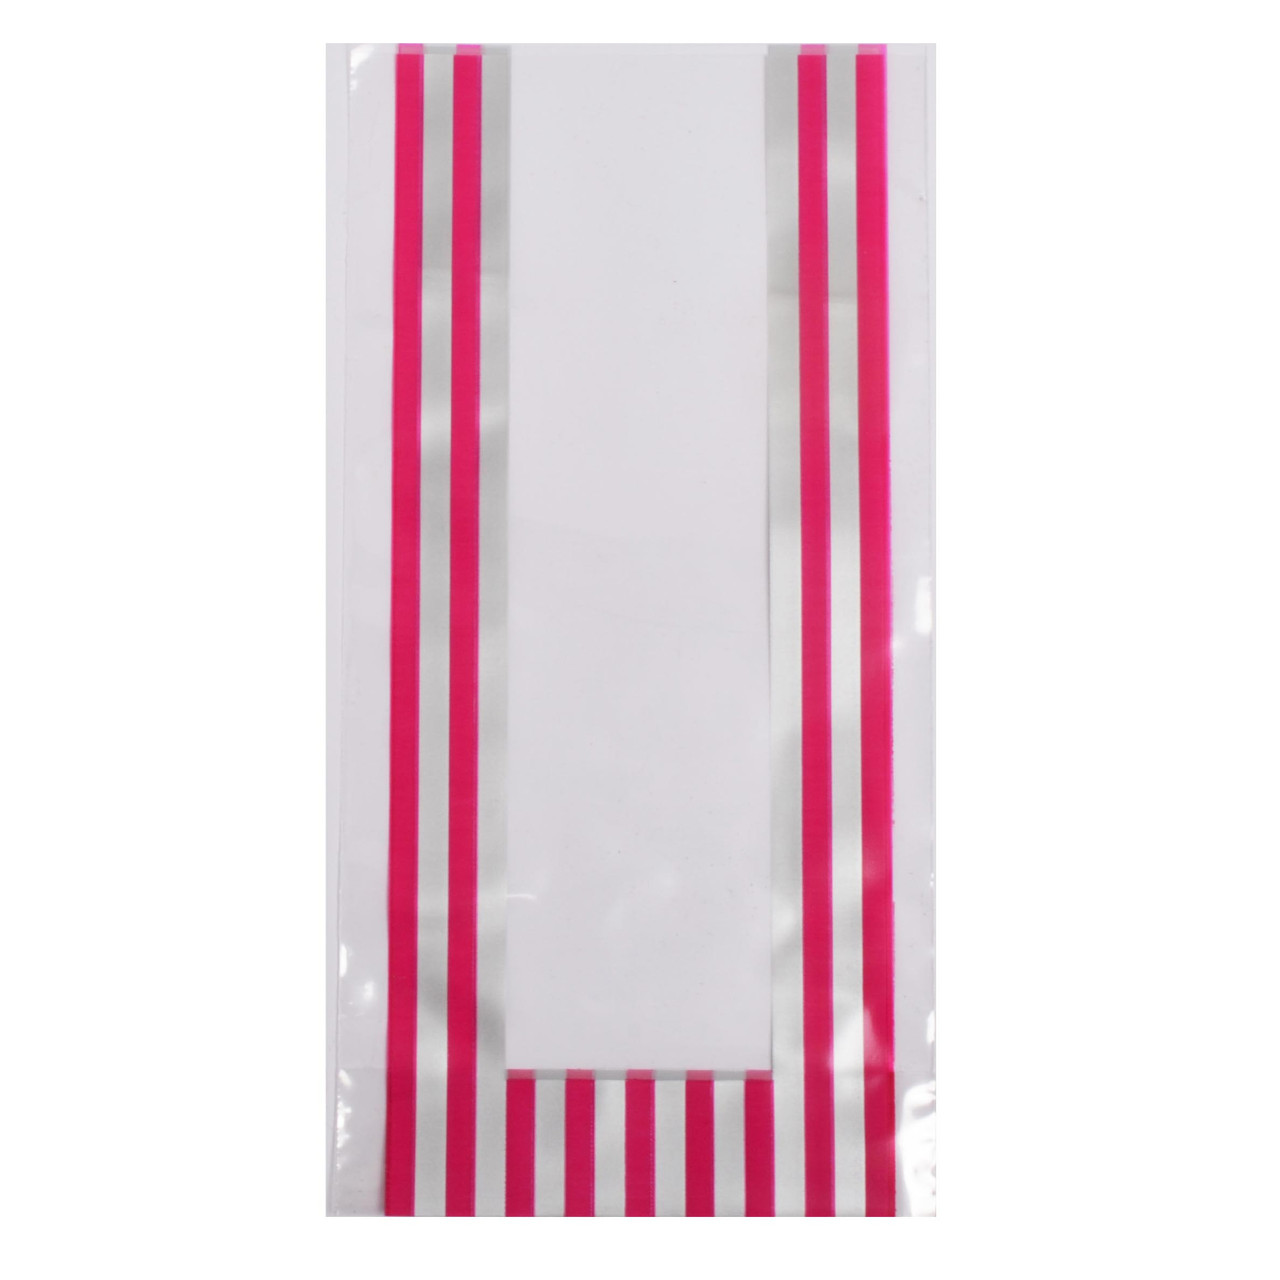 Pkt 8 - Pink & Silver Striped printed Bag 10.5 x 21 cms